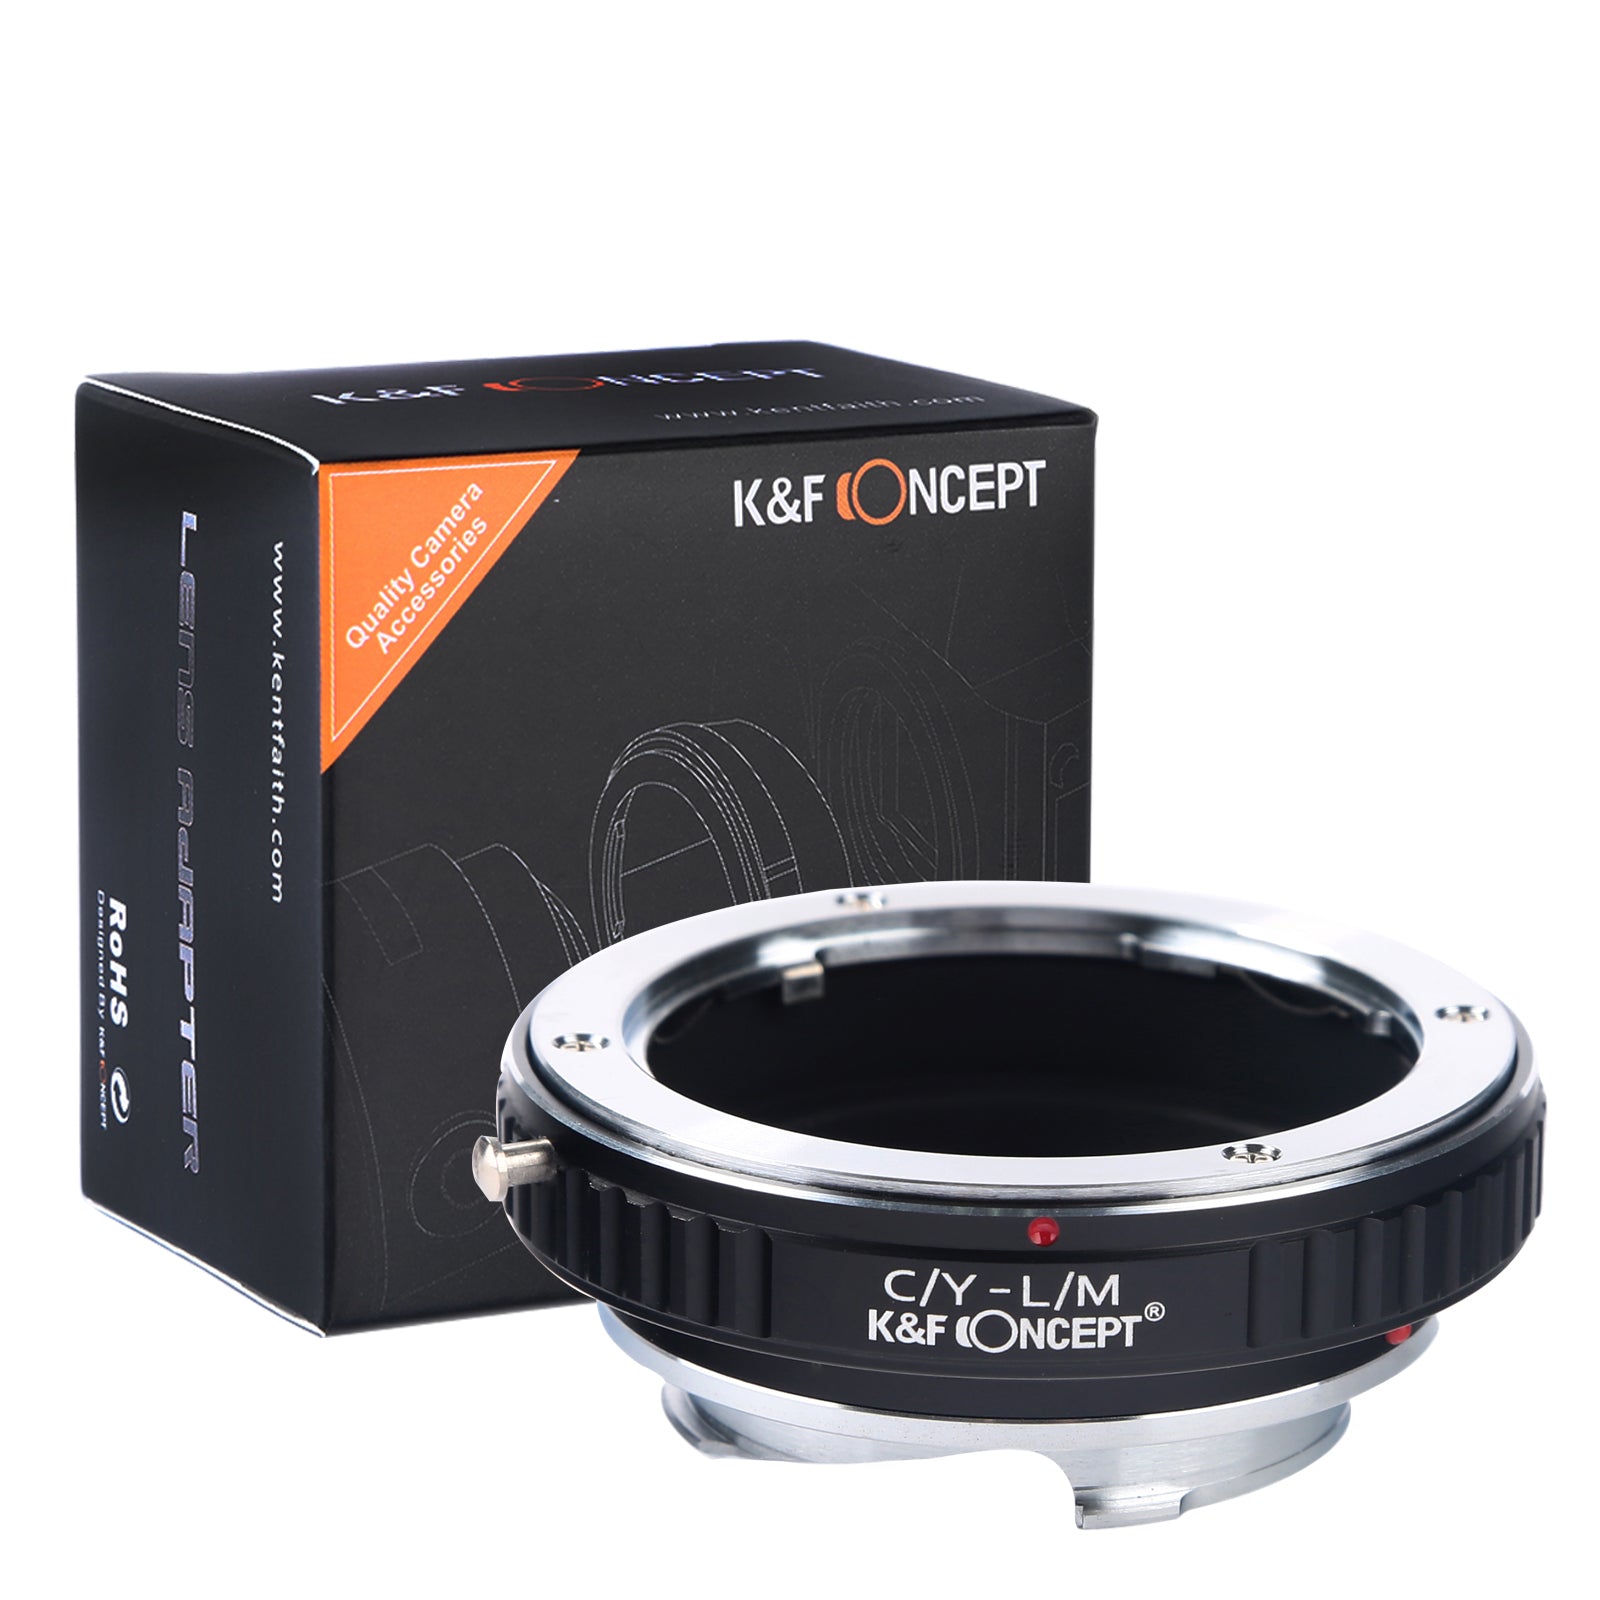 K&F CONCEPT Contax Zeiss CY-LM Leica M Lens mount adapter